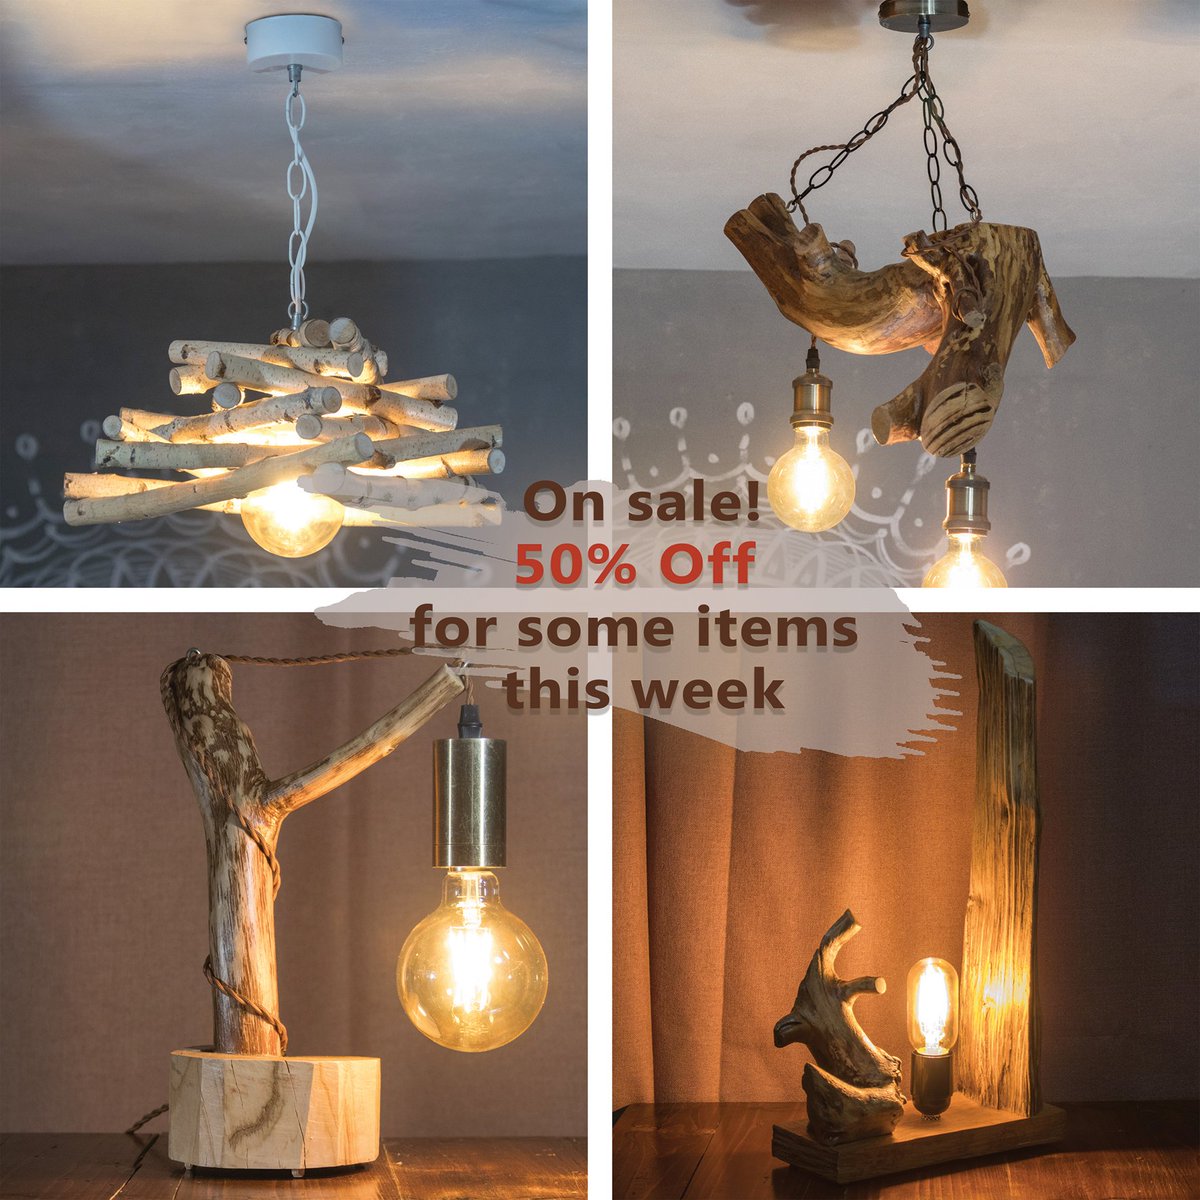 Don't miss out! 50% Off for some items this week, shop now👇
etsy.com/shop/jiwoodlamp
.
#woodlamp #woodlight #decorideas #farmhouse #homedecor #etsy #etsysale #greatsale #bigsale